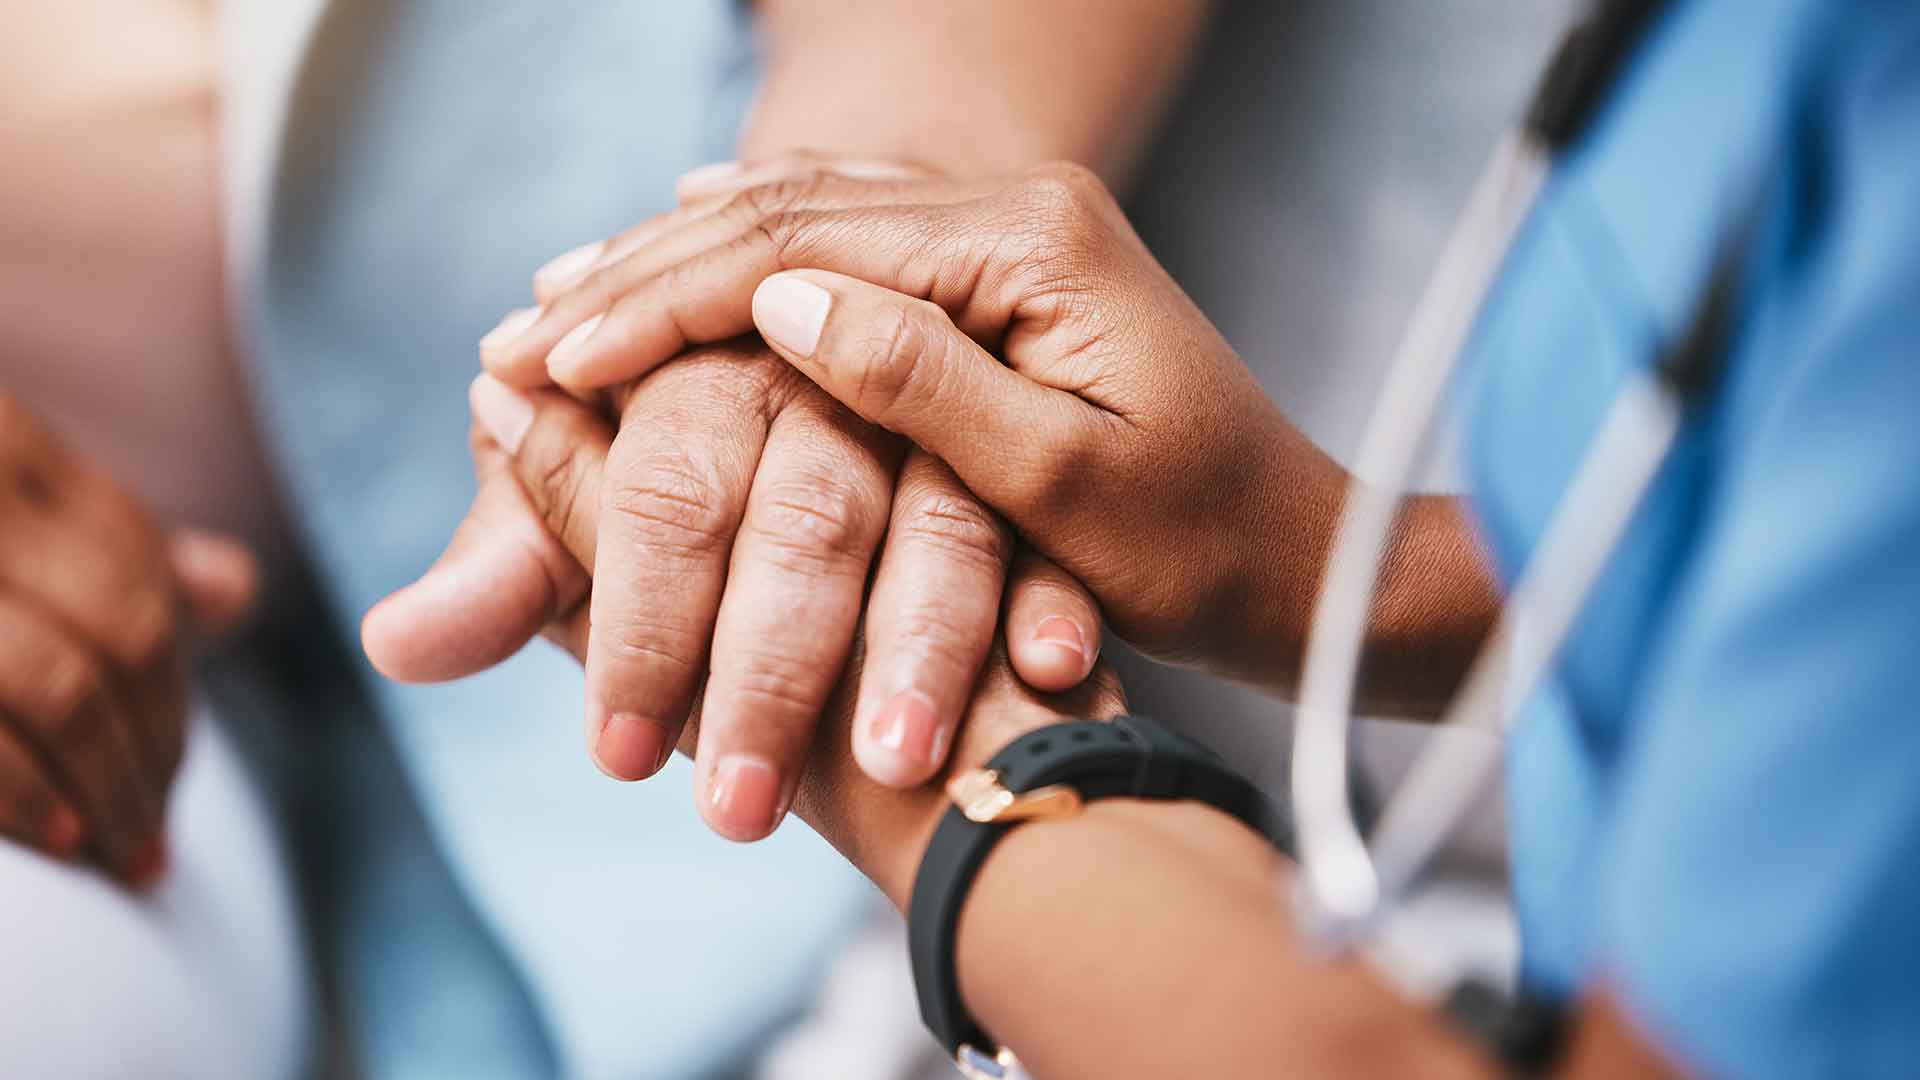 How physician leadership can restore trust in the patient-physician relationship